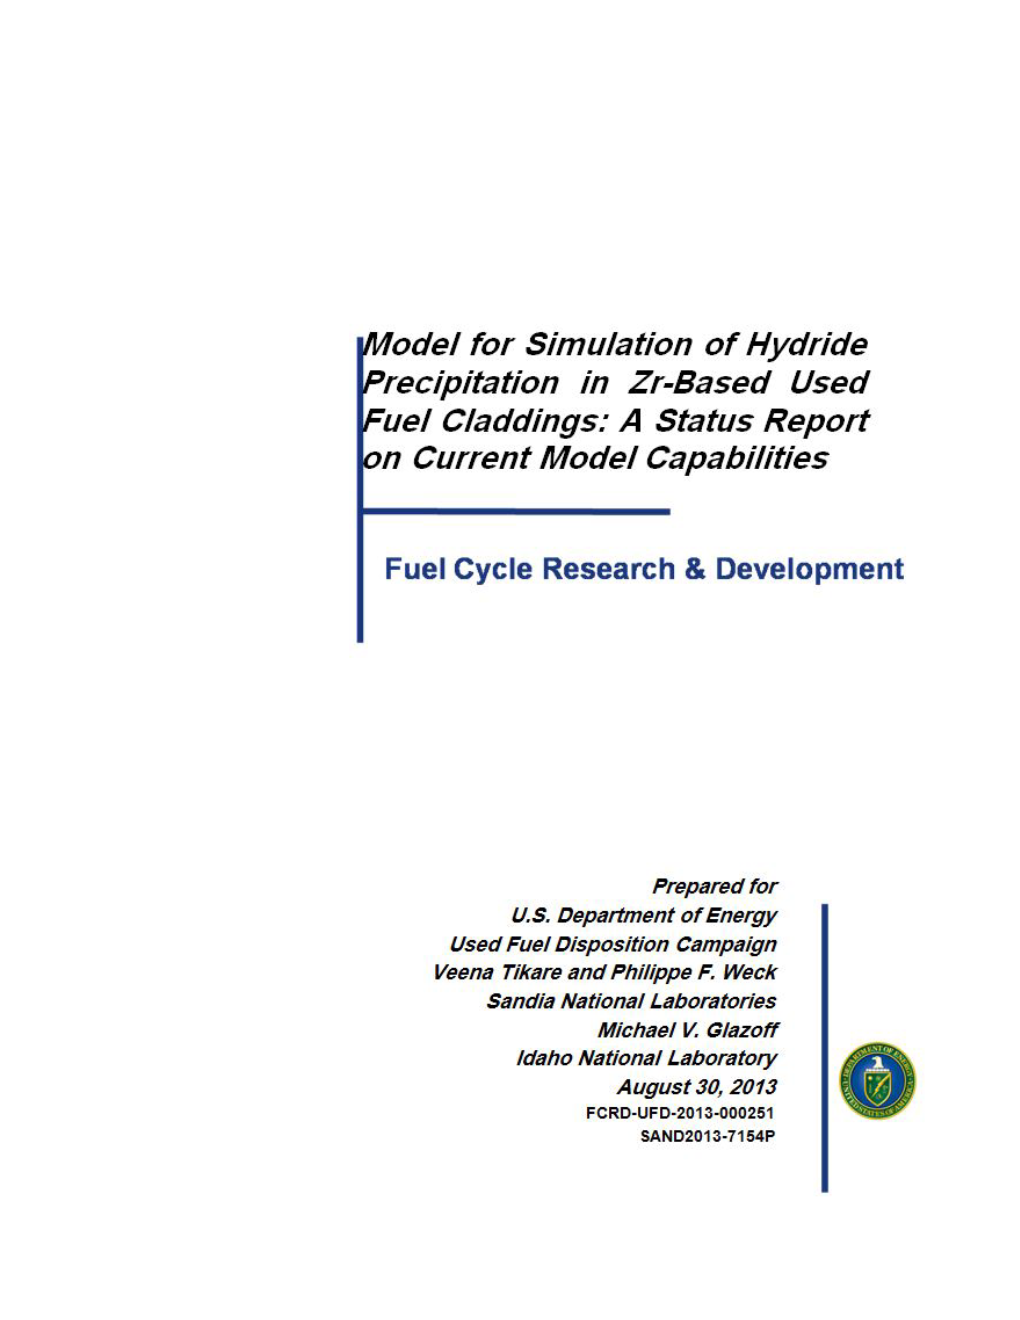 Model for Simulation of Hydride Precipitation in Zr-Based Used Fuel Claddings: a Status Report on Current Model Capabilities August 30, 2013 Iii